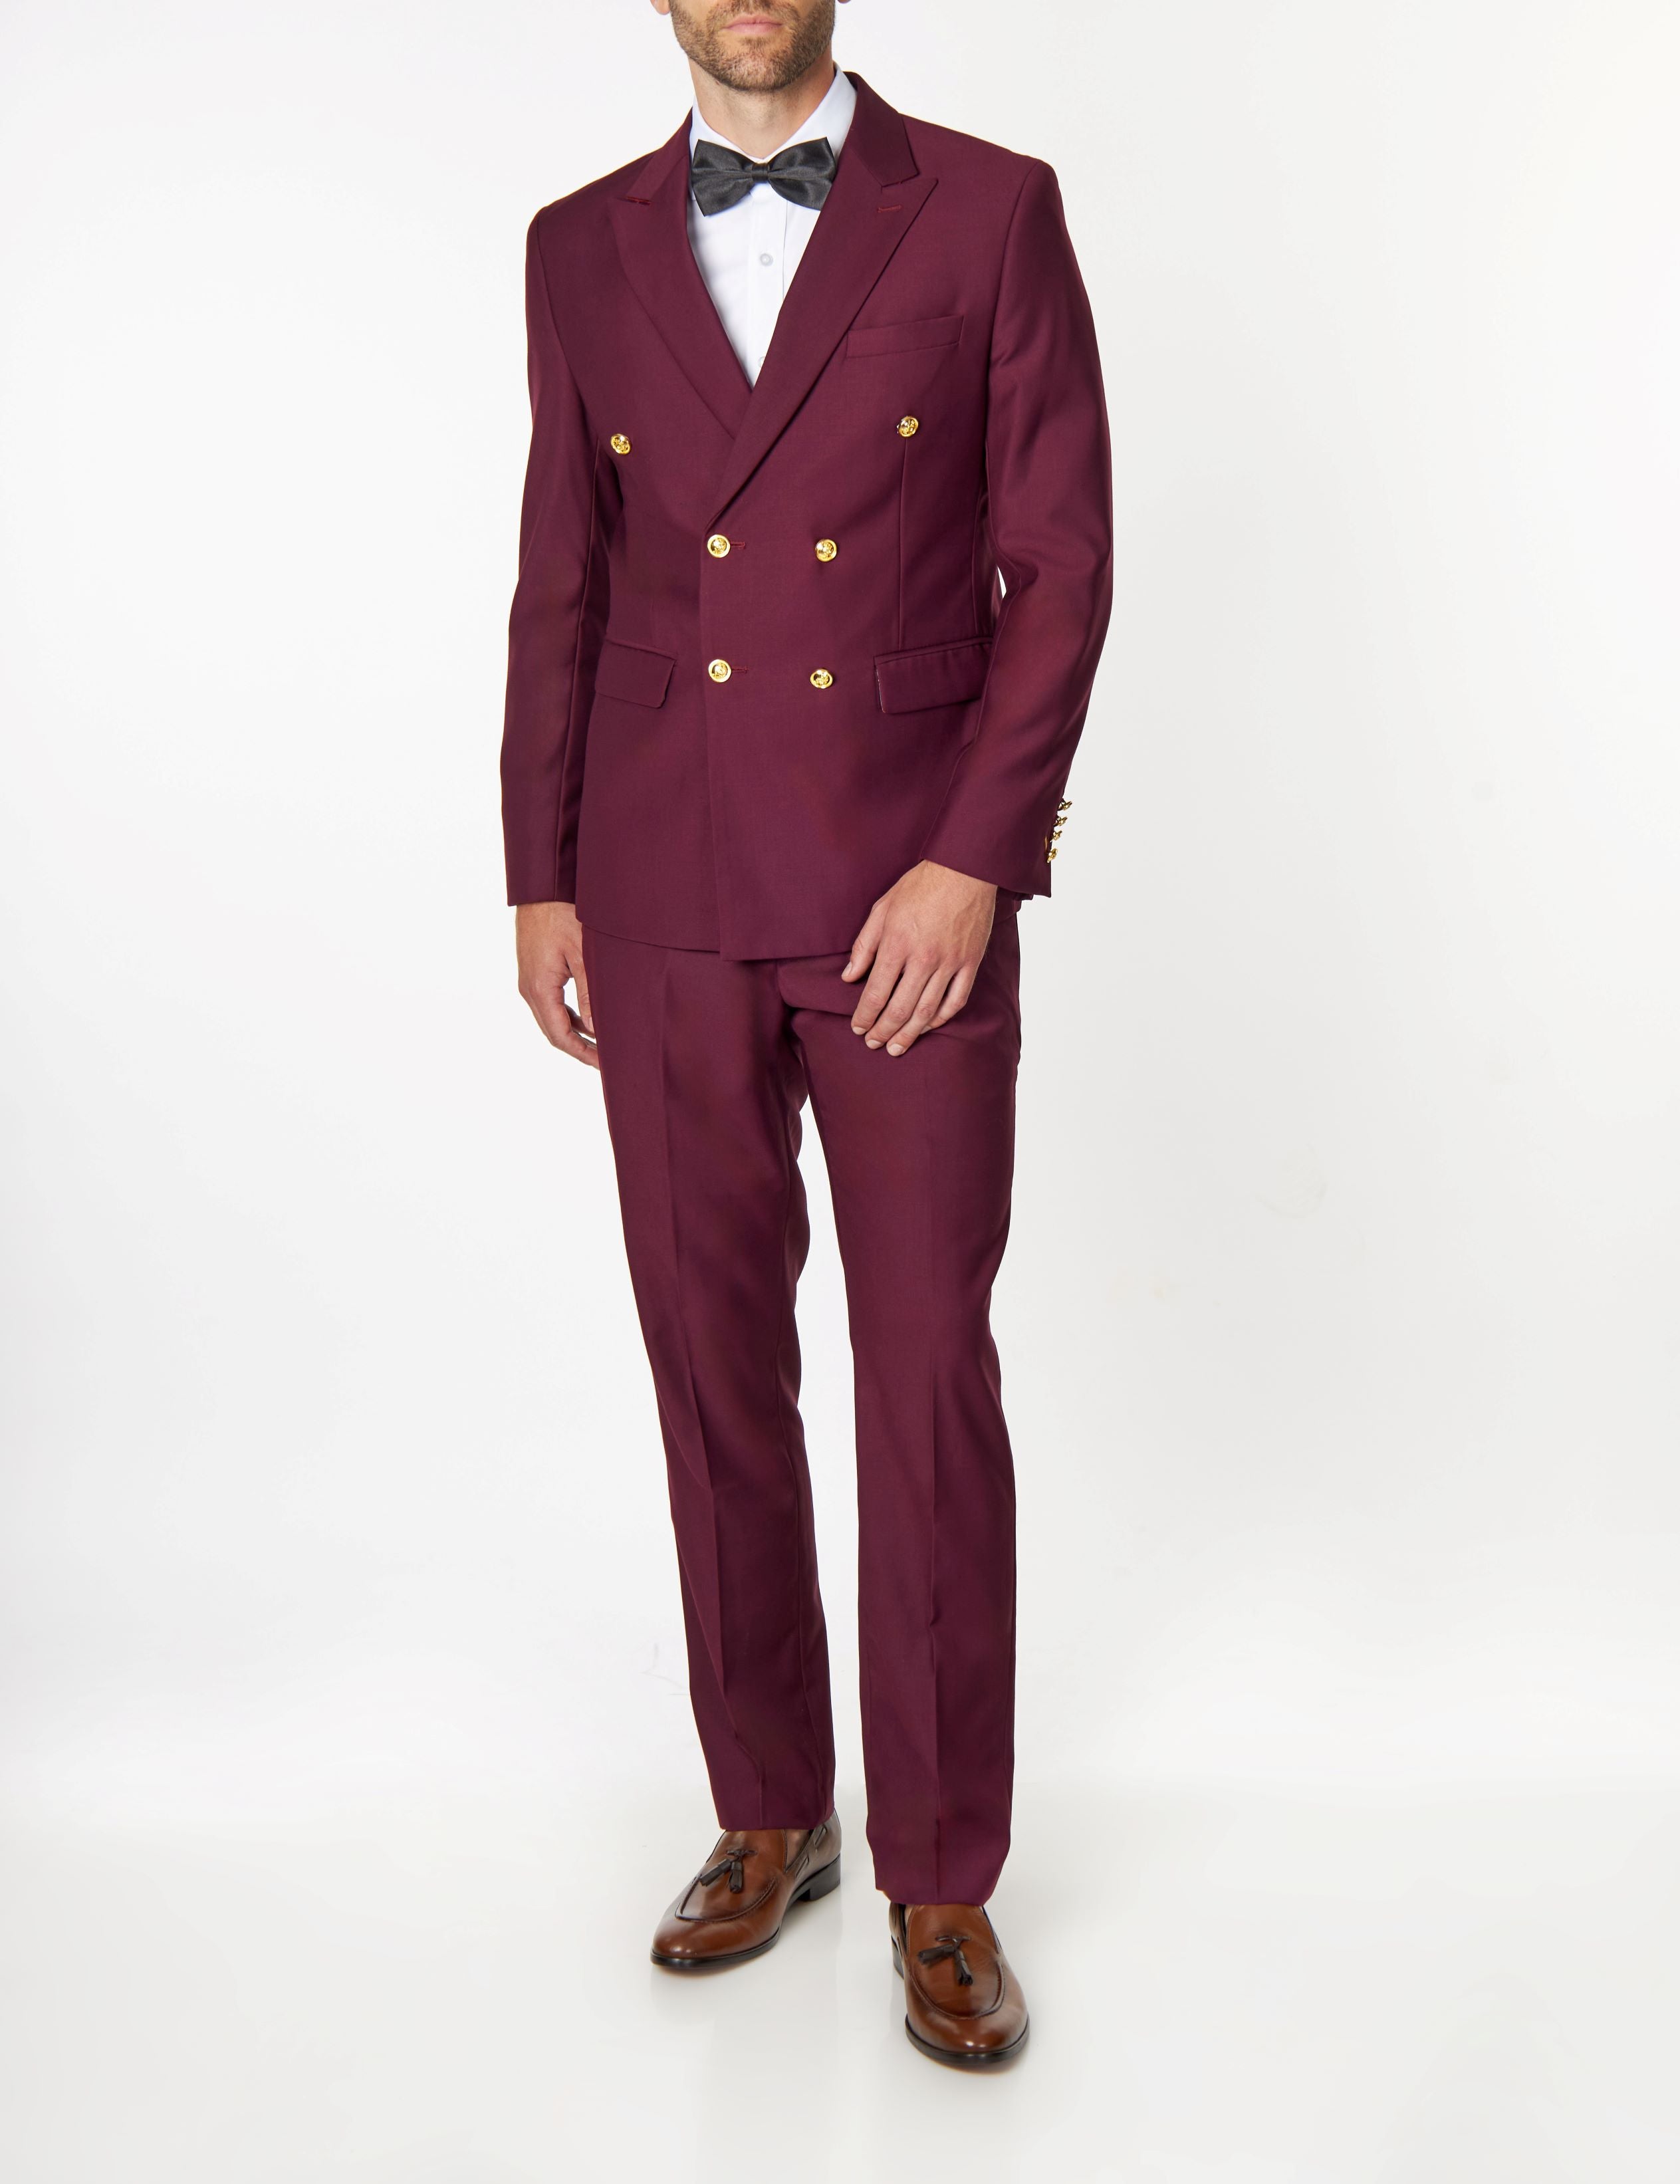 MAROON DOUBLE BREASTED GOLD BUTTON JACKET